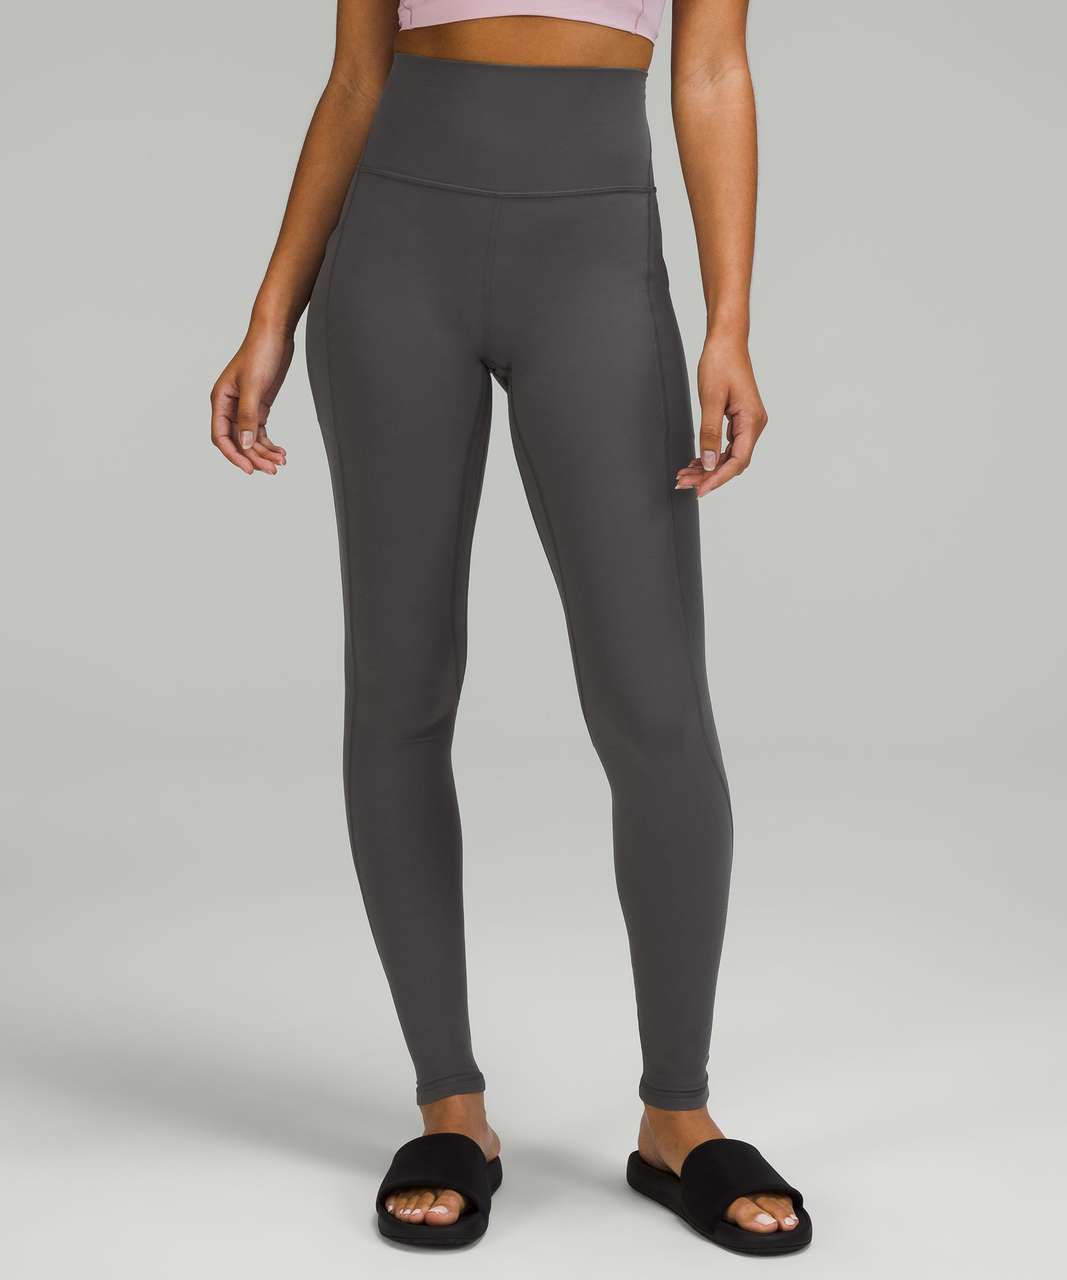 Lululemon Align High-Rise Pant with Pockets 31" - Graphite Grey